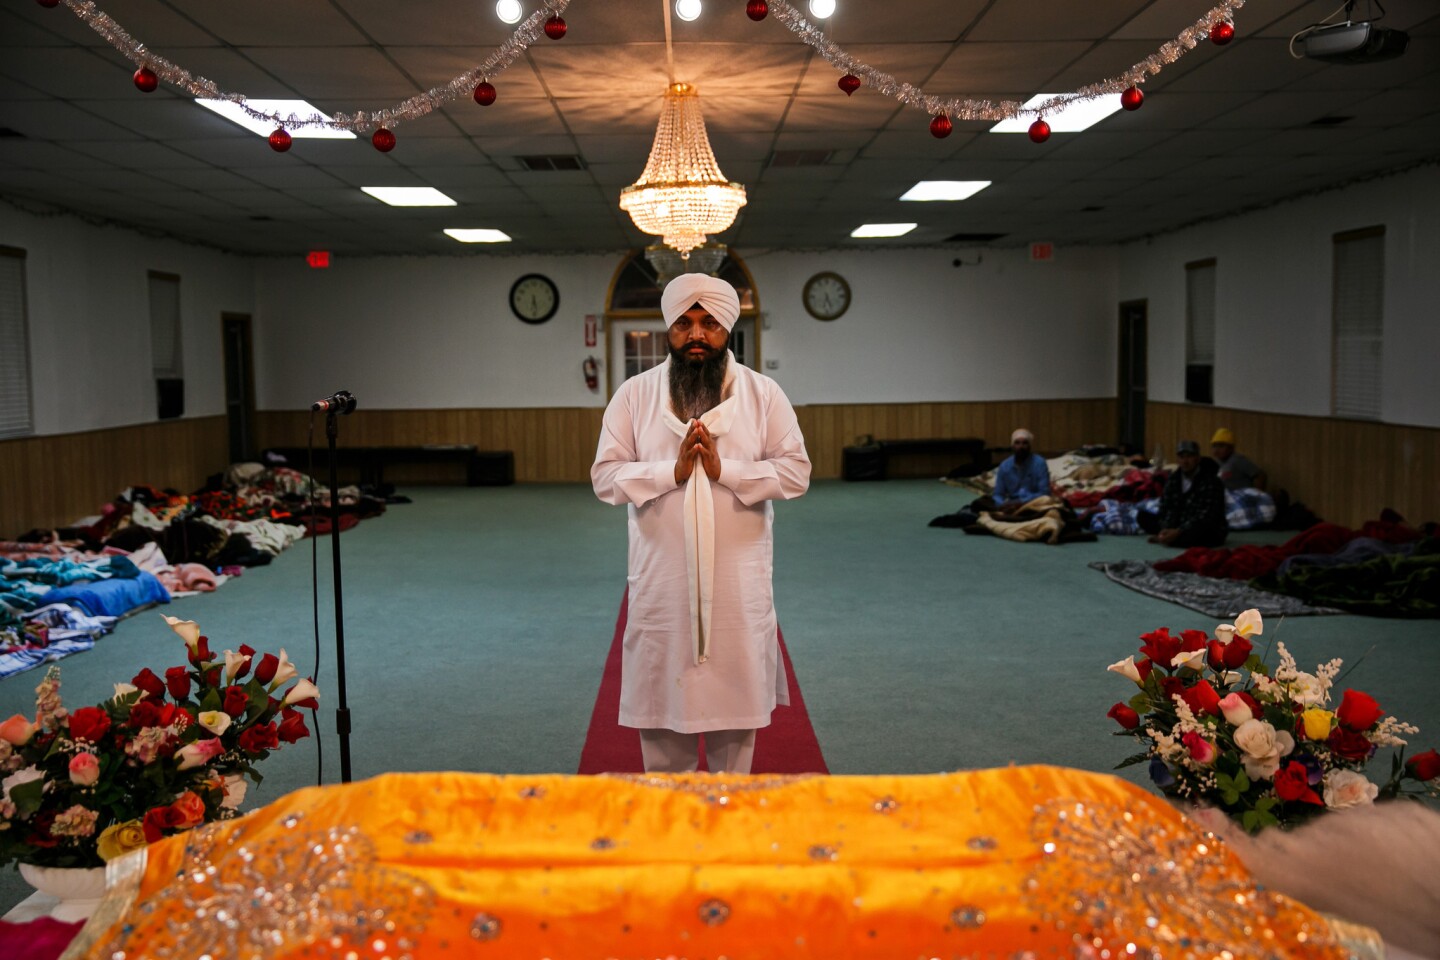 Nirmal Singh, a Sikh priest, conducts a morning prayer ritual as evacuees sleep in the background at Shri Guru Ravidass, a Sikh temple in Rio Linda, Calif., that opened its doors amid the Oroville Dam crisis.